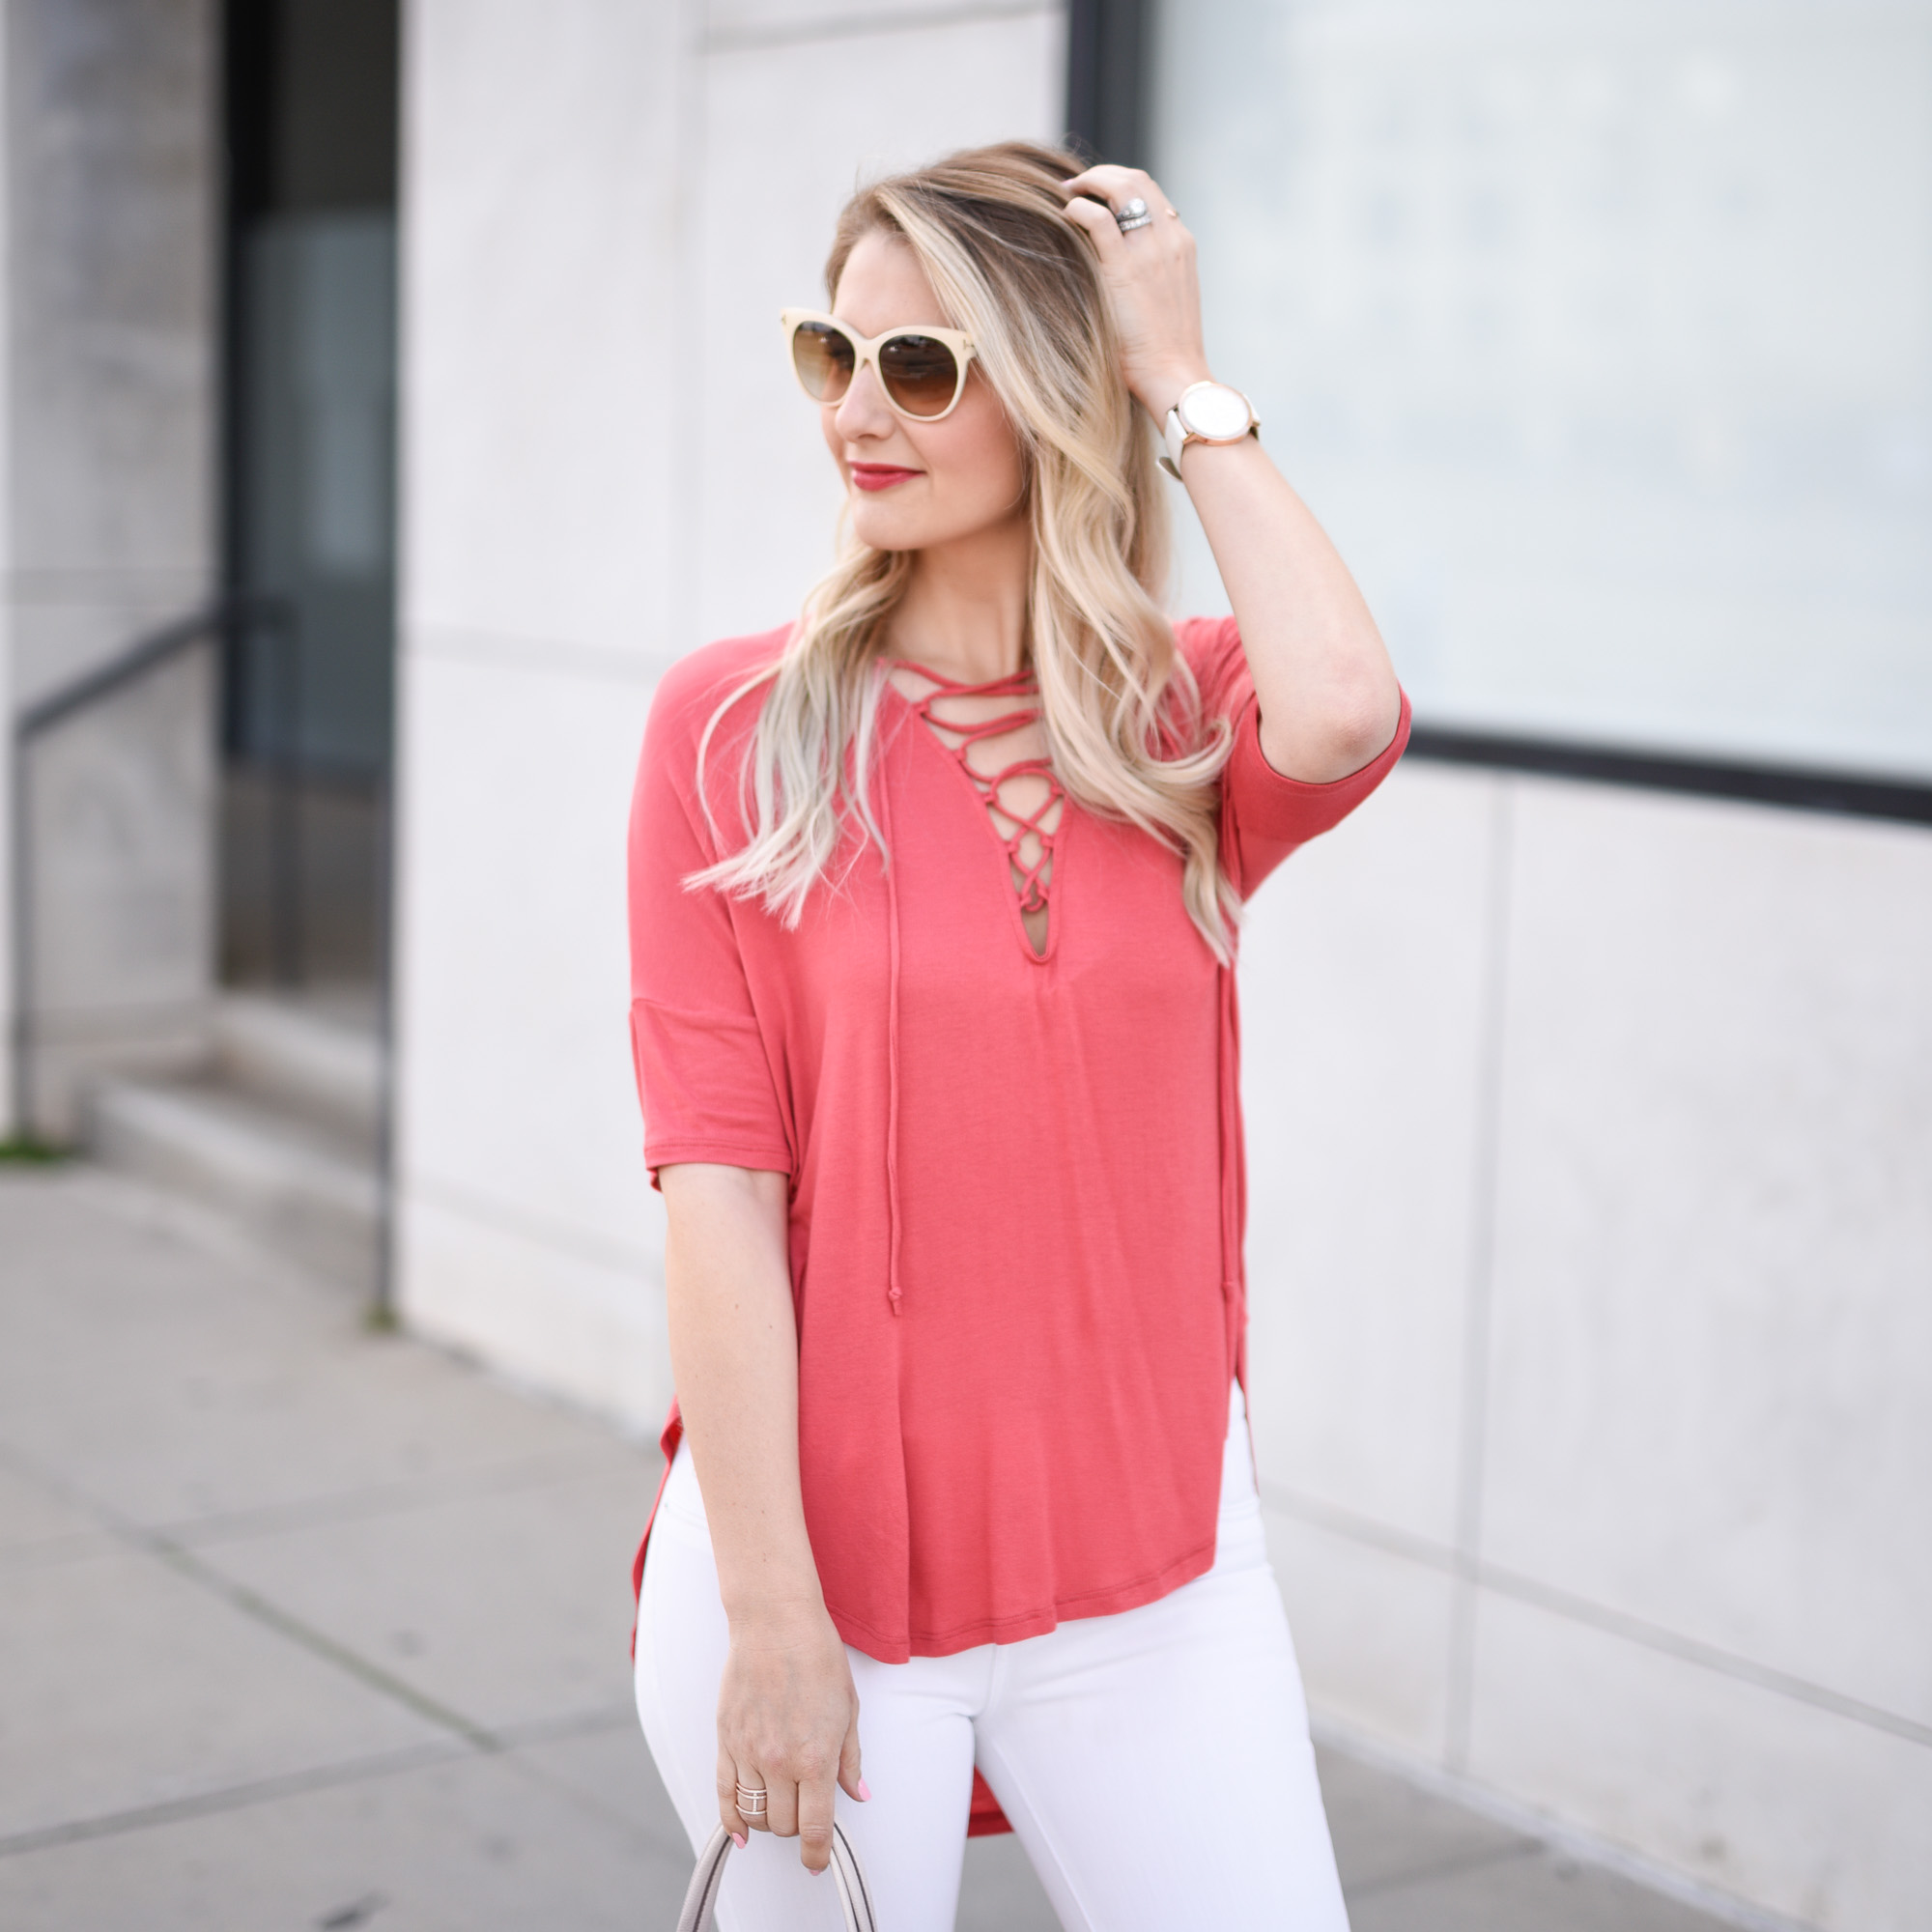 The most comfortable top with lace up detail which is so on trend! 